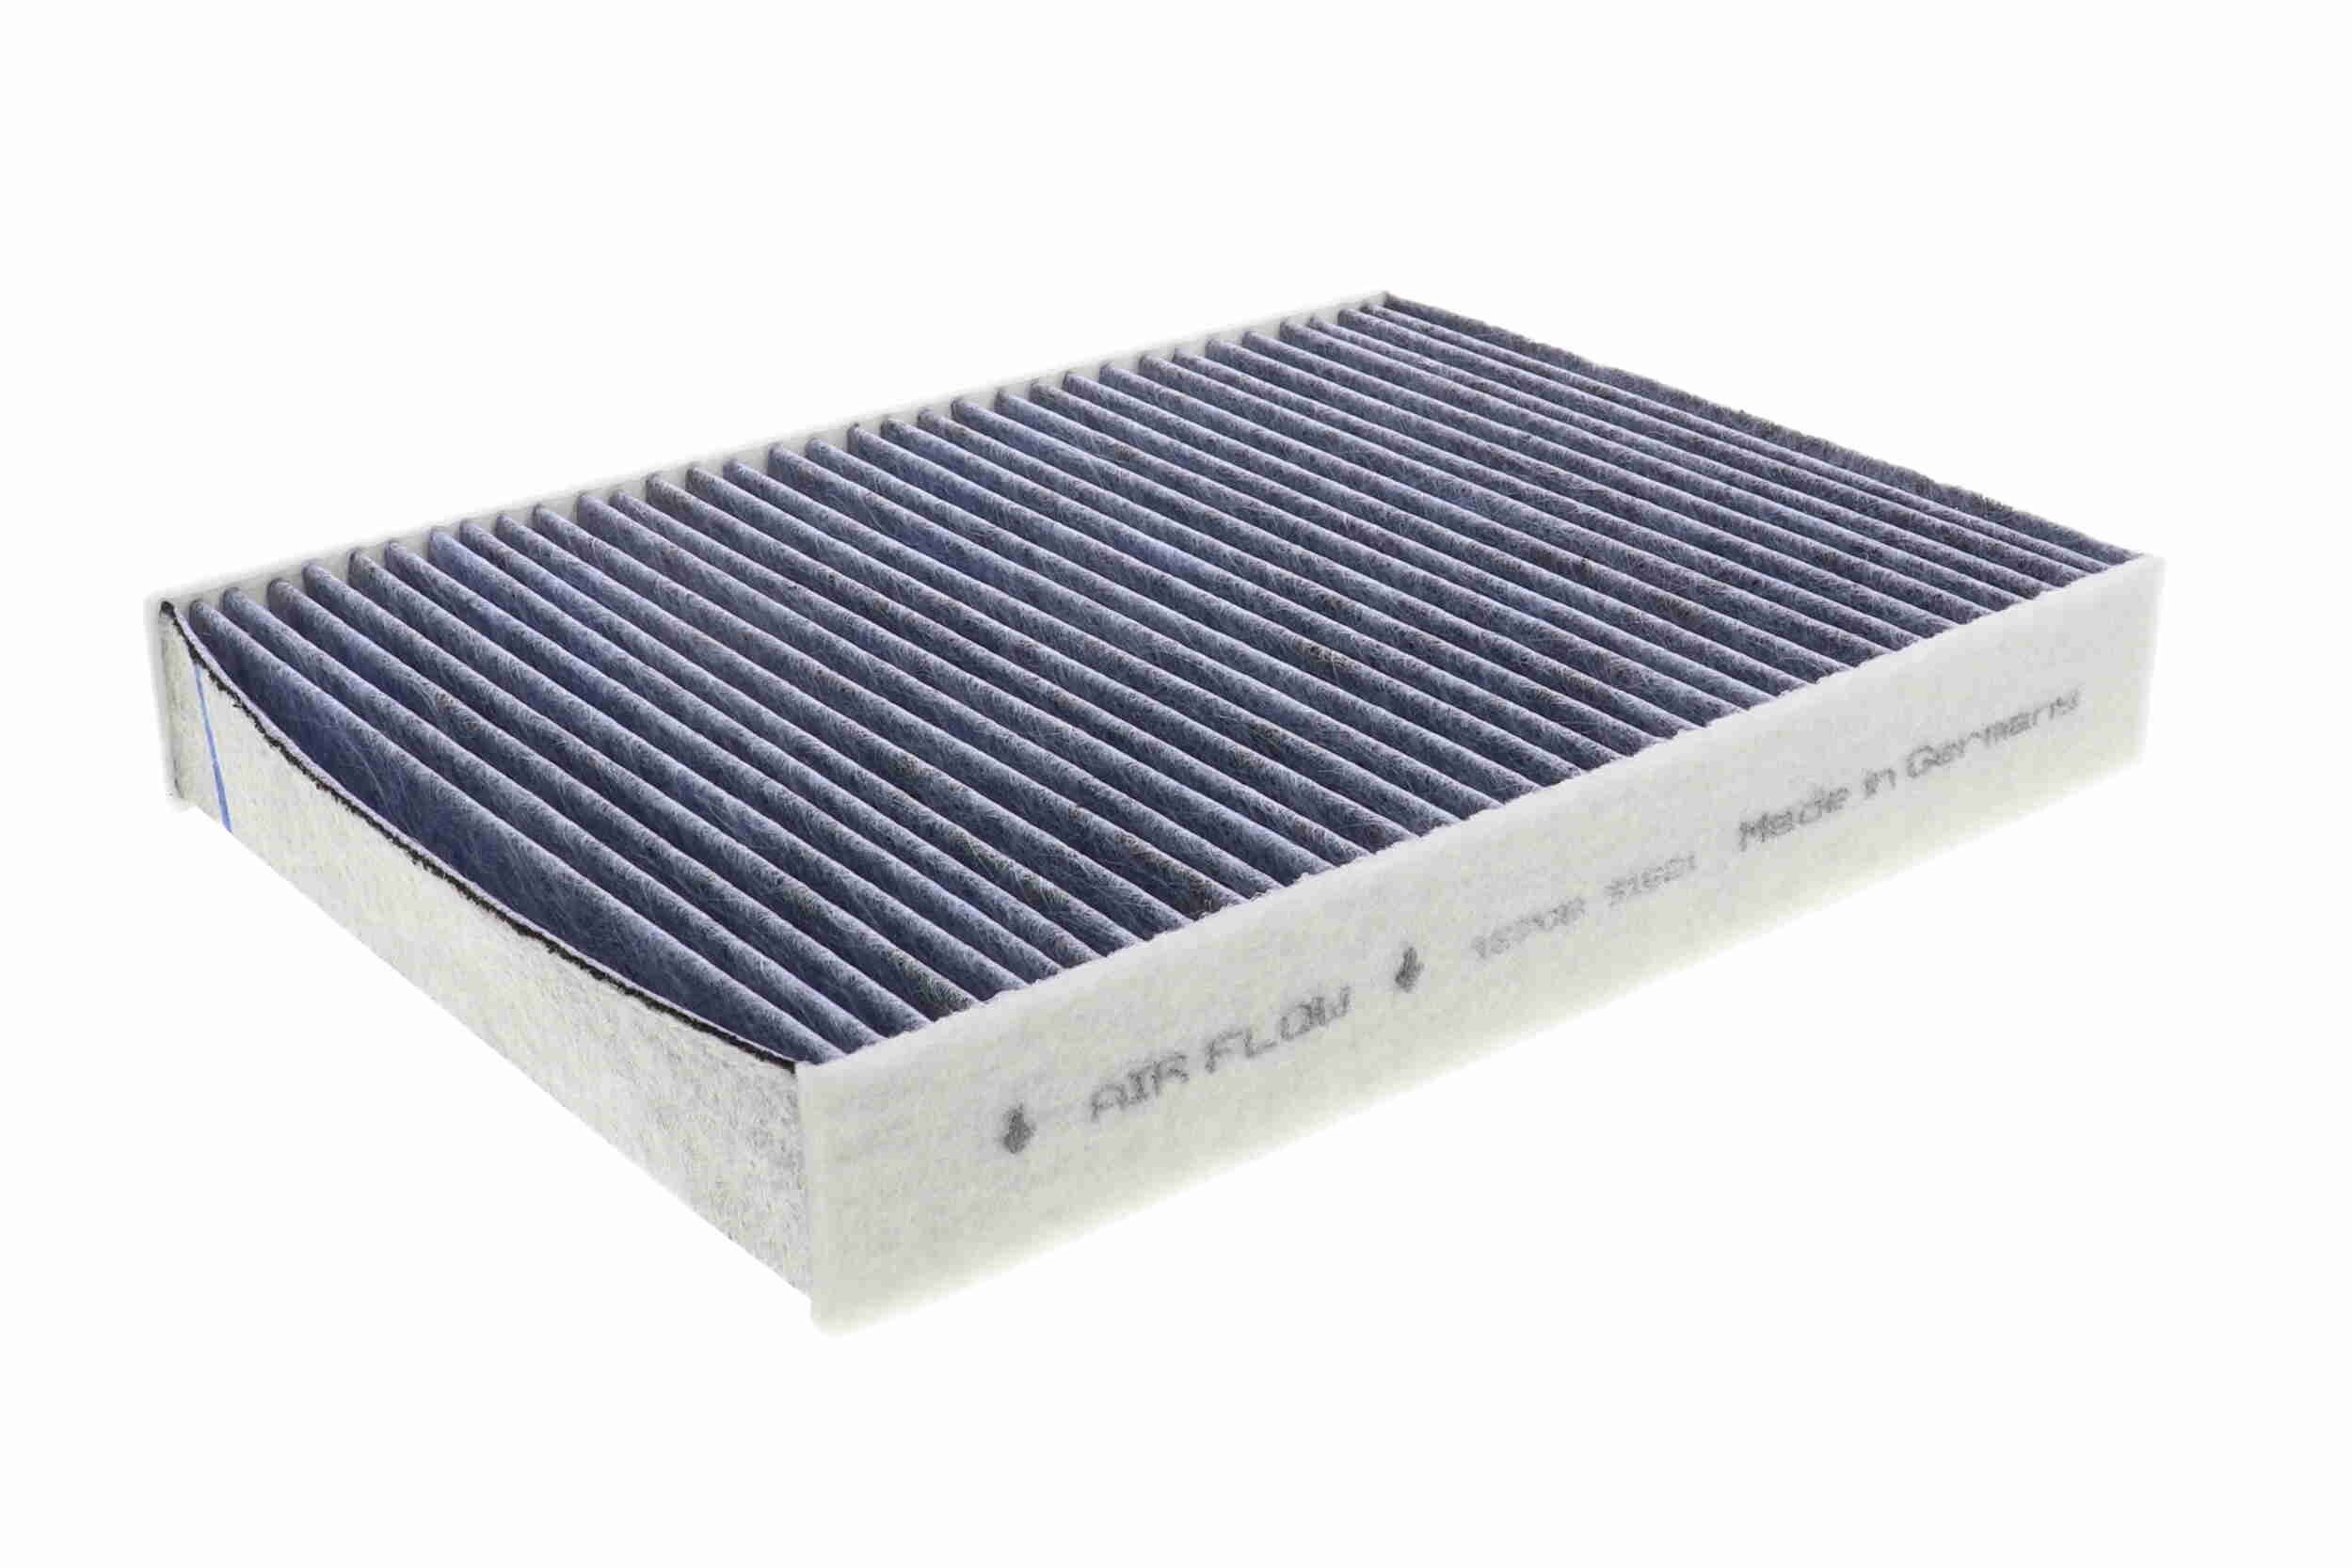 VEMO V46-32-0004 Pollen filter bio-functional cabin air filter, with antibacterial action, with fungicidal effect, Particulate filter (PM 2.5), with anti-allergic effect, with Odour Absorbent Effect, 250 mm x 179 mm x 35 mm, Activated Carbon